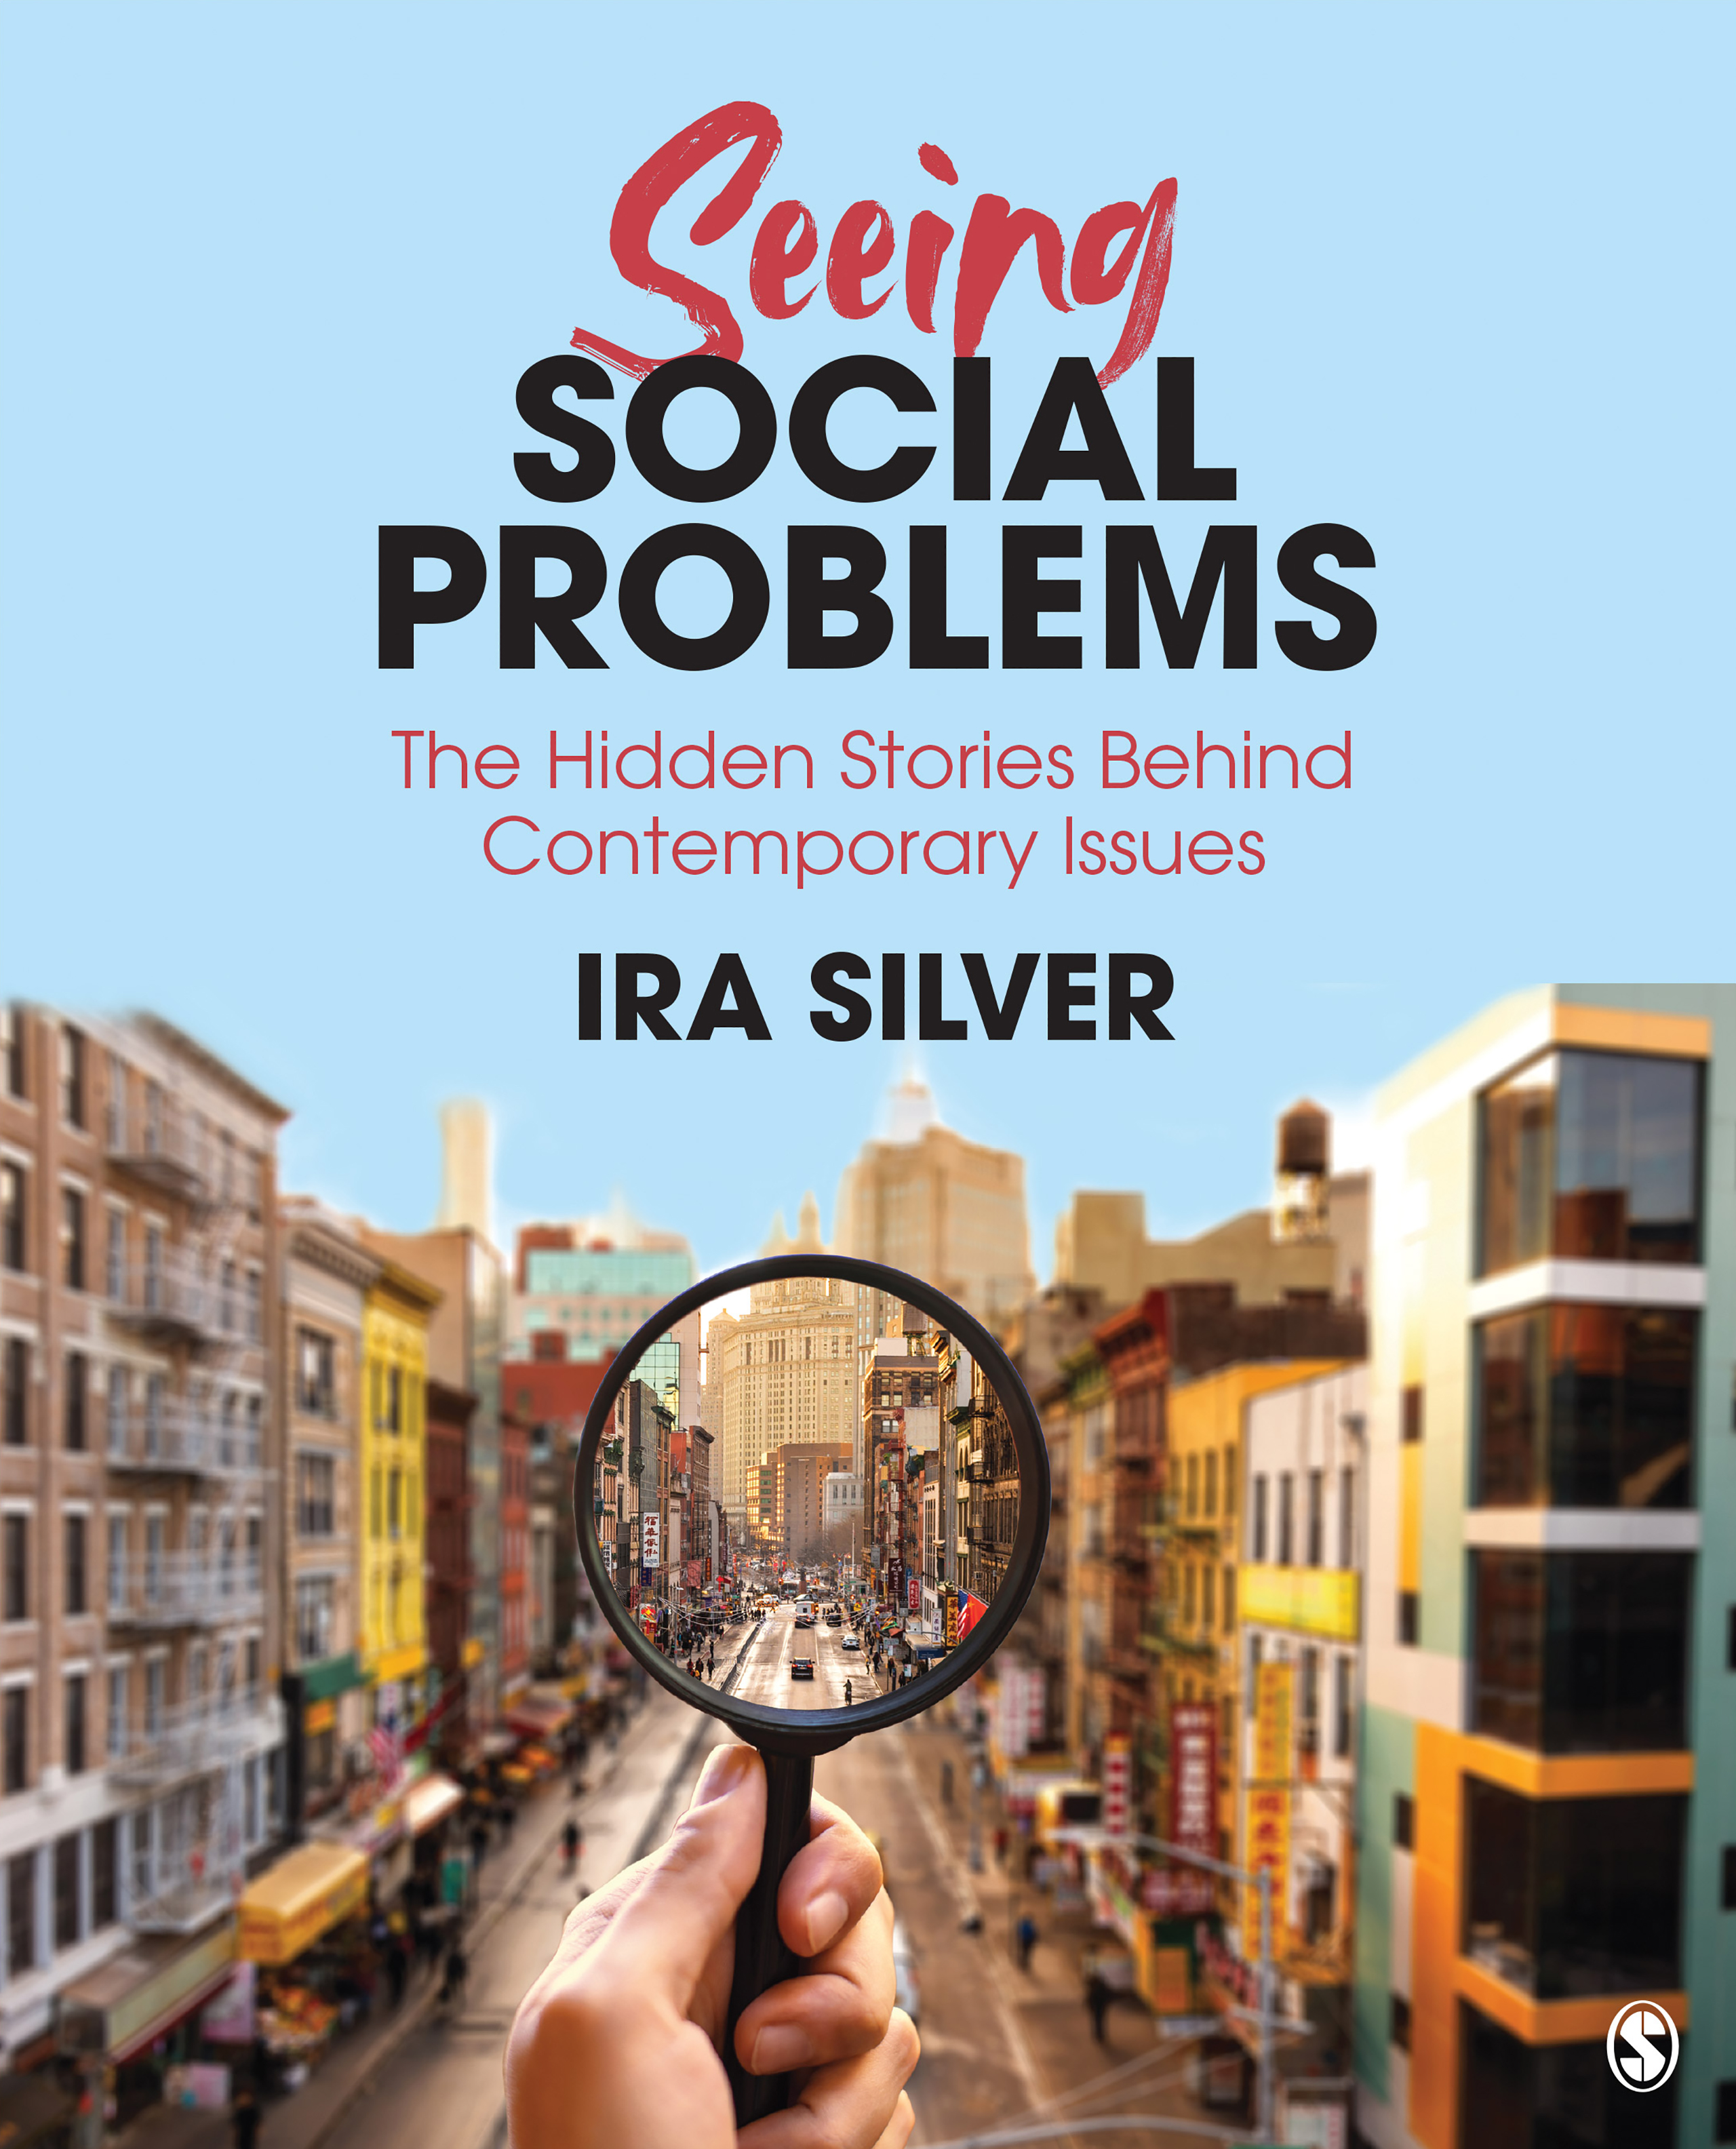 Seeing Social Problems: The Hidden Stories Behind Contemporary Issues (180 Day Access)